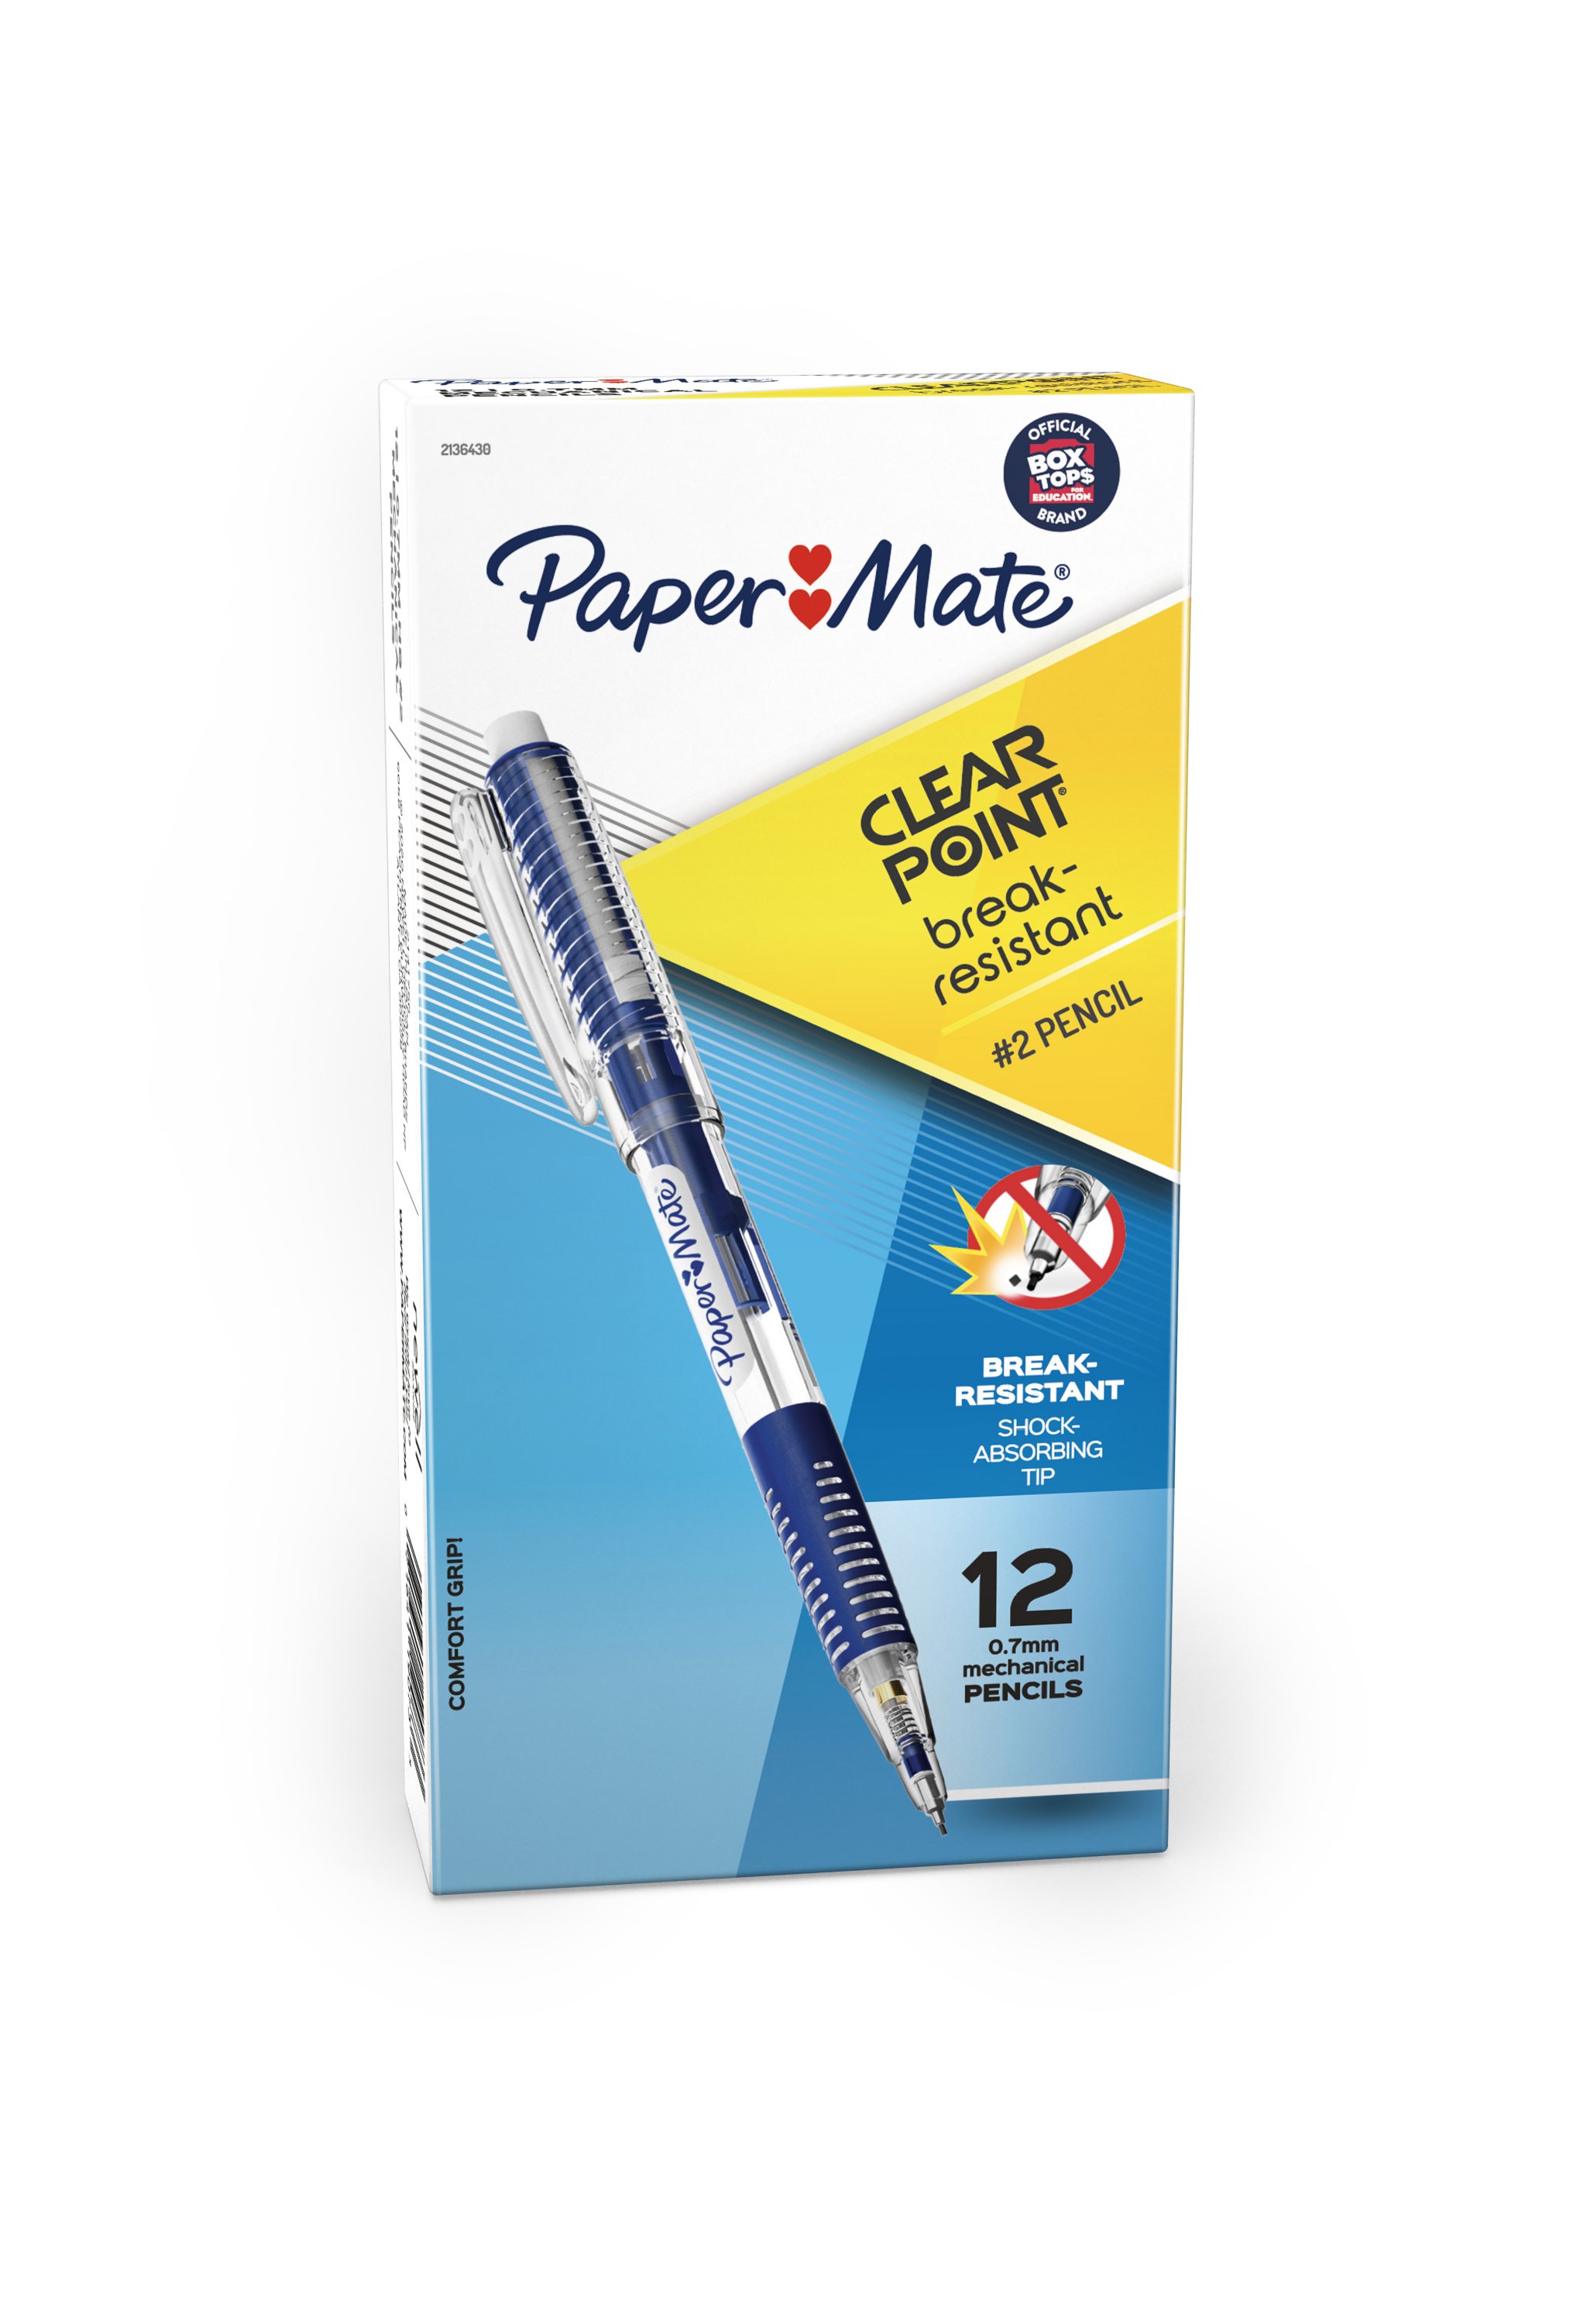 Open Foresee latch Paper Mate Clearpoint Break-Resistant Mechanical Pencils, 0.7mm, HB #2 Lead  | Papermate